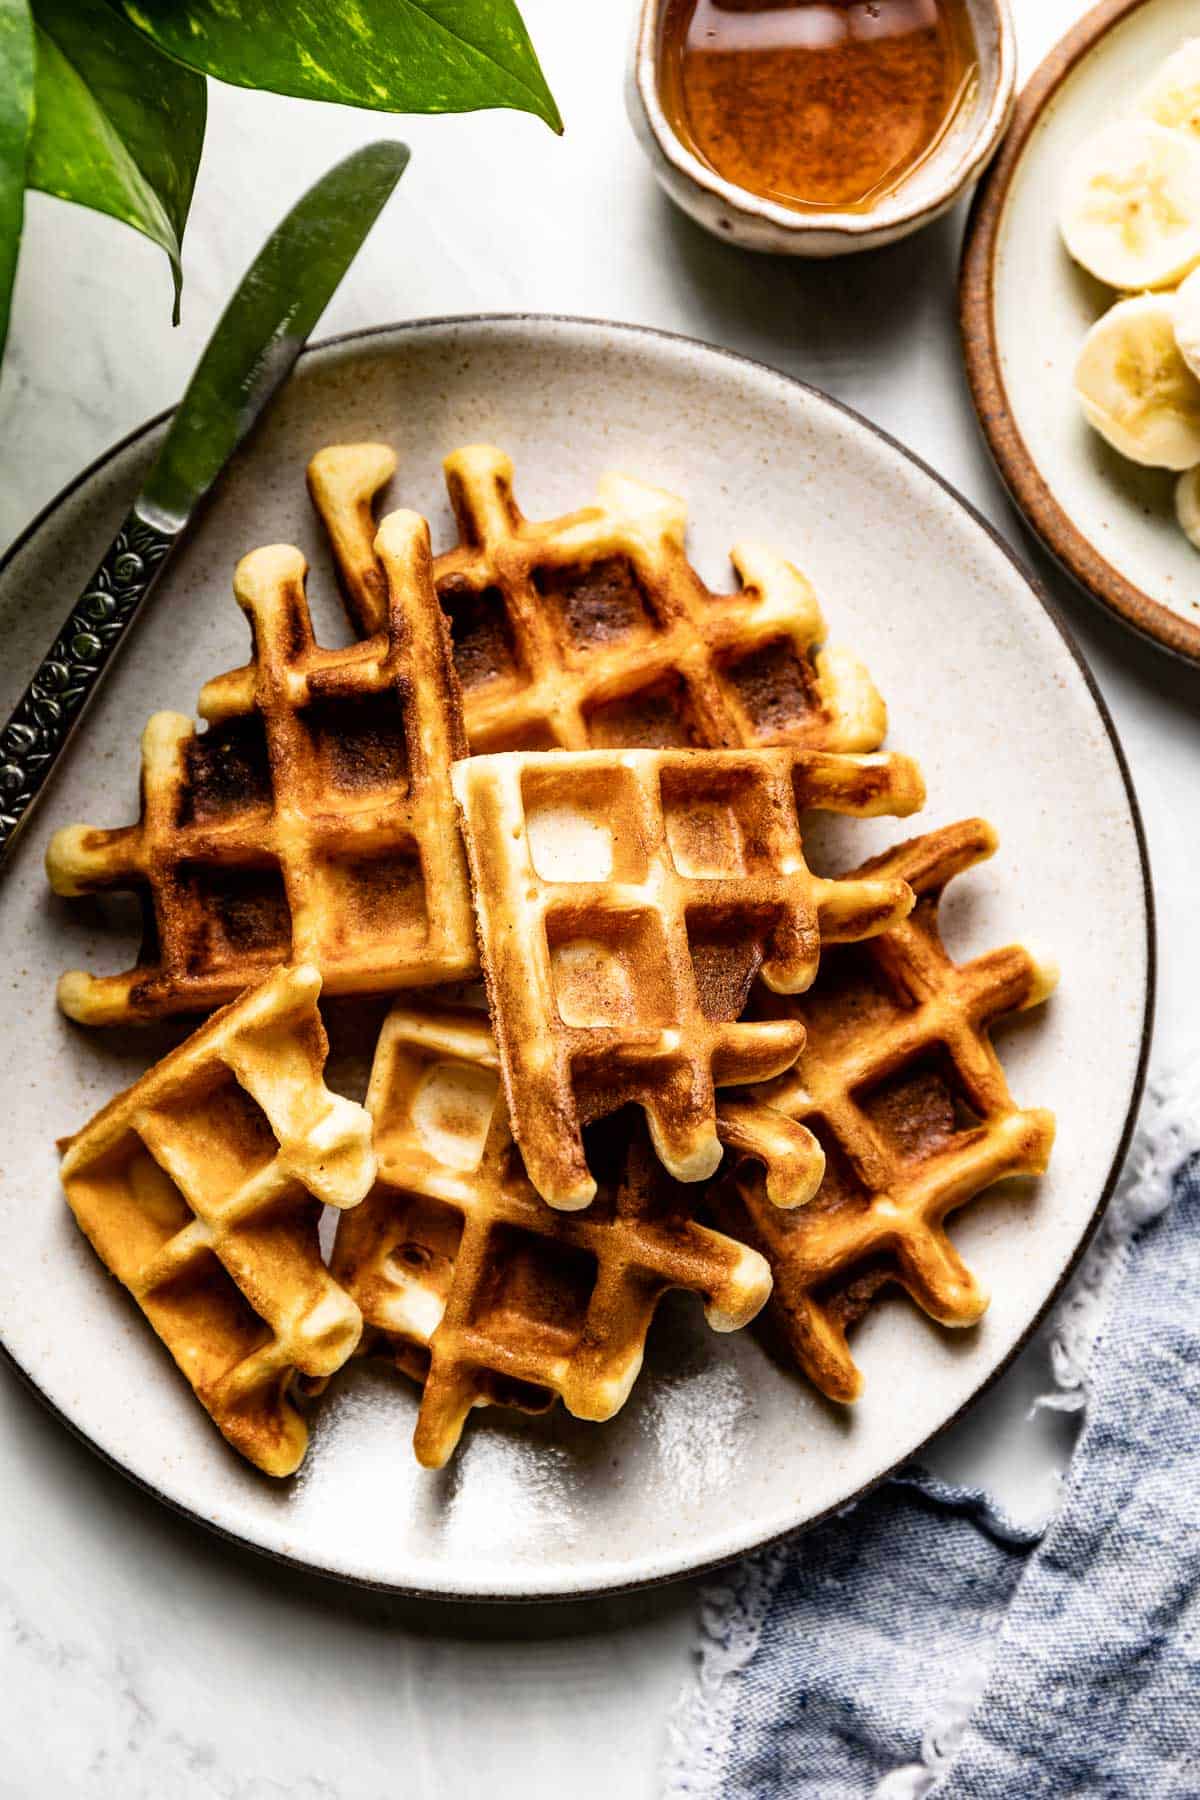 https://foolproofliving.com/wp-content/uploads/2014/07/Yeasted-Waffles.jpg